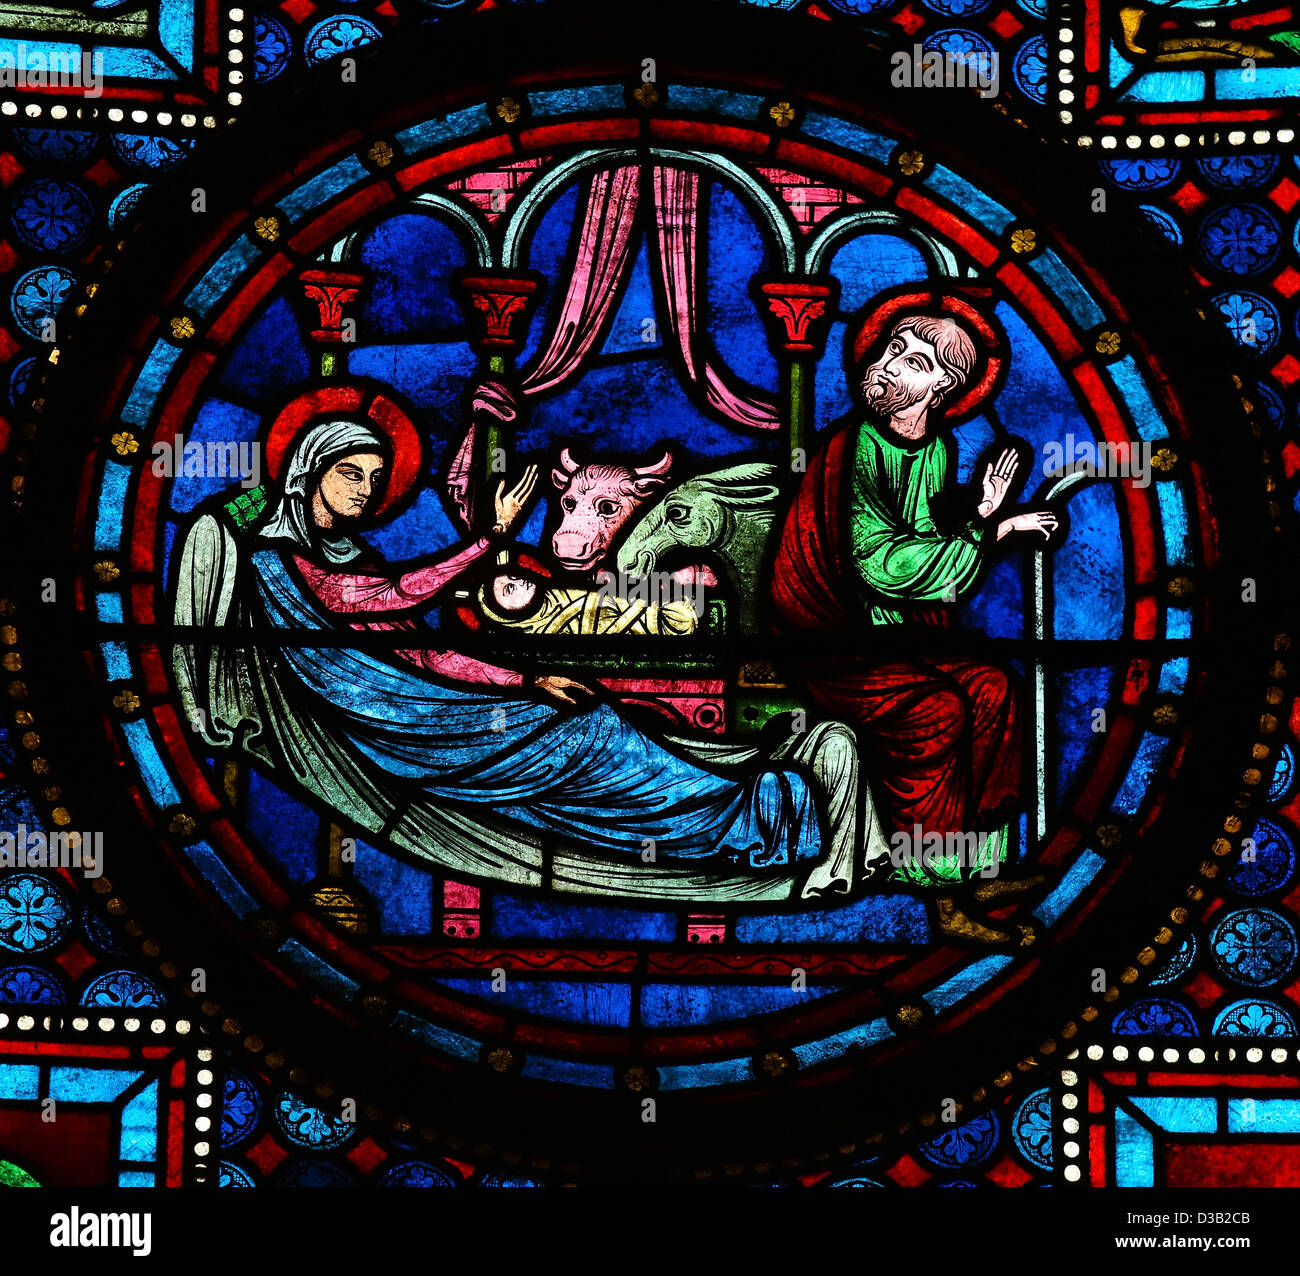 Stained glass window depicting the Holy Family in Bethlehem, in the cathedral of Bayeux, Normandy, France. Stock Photo